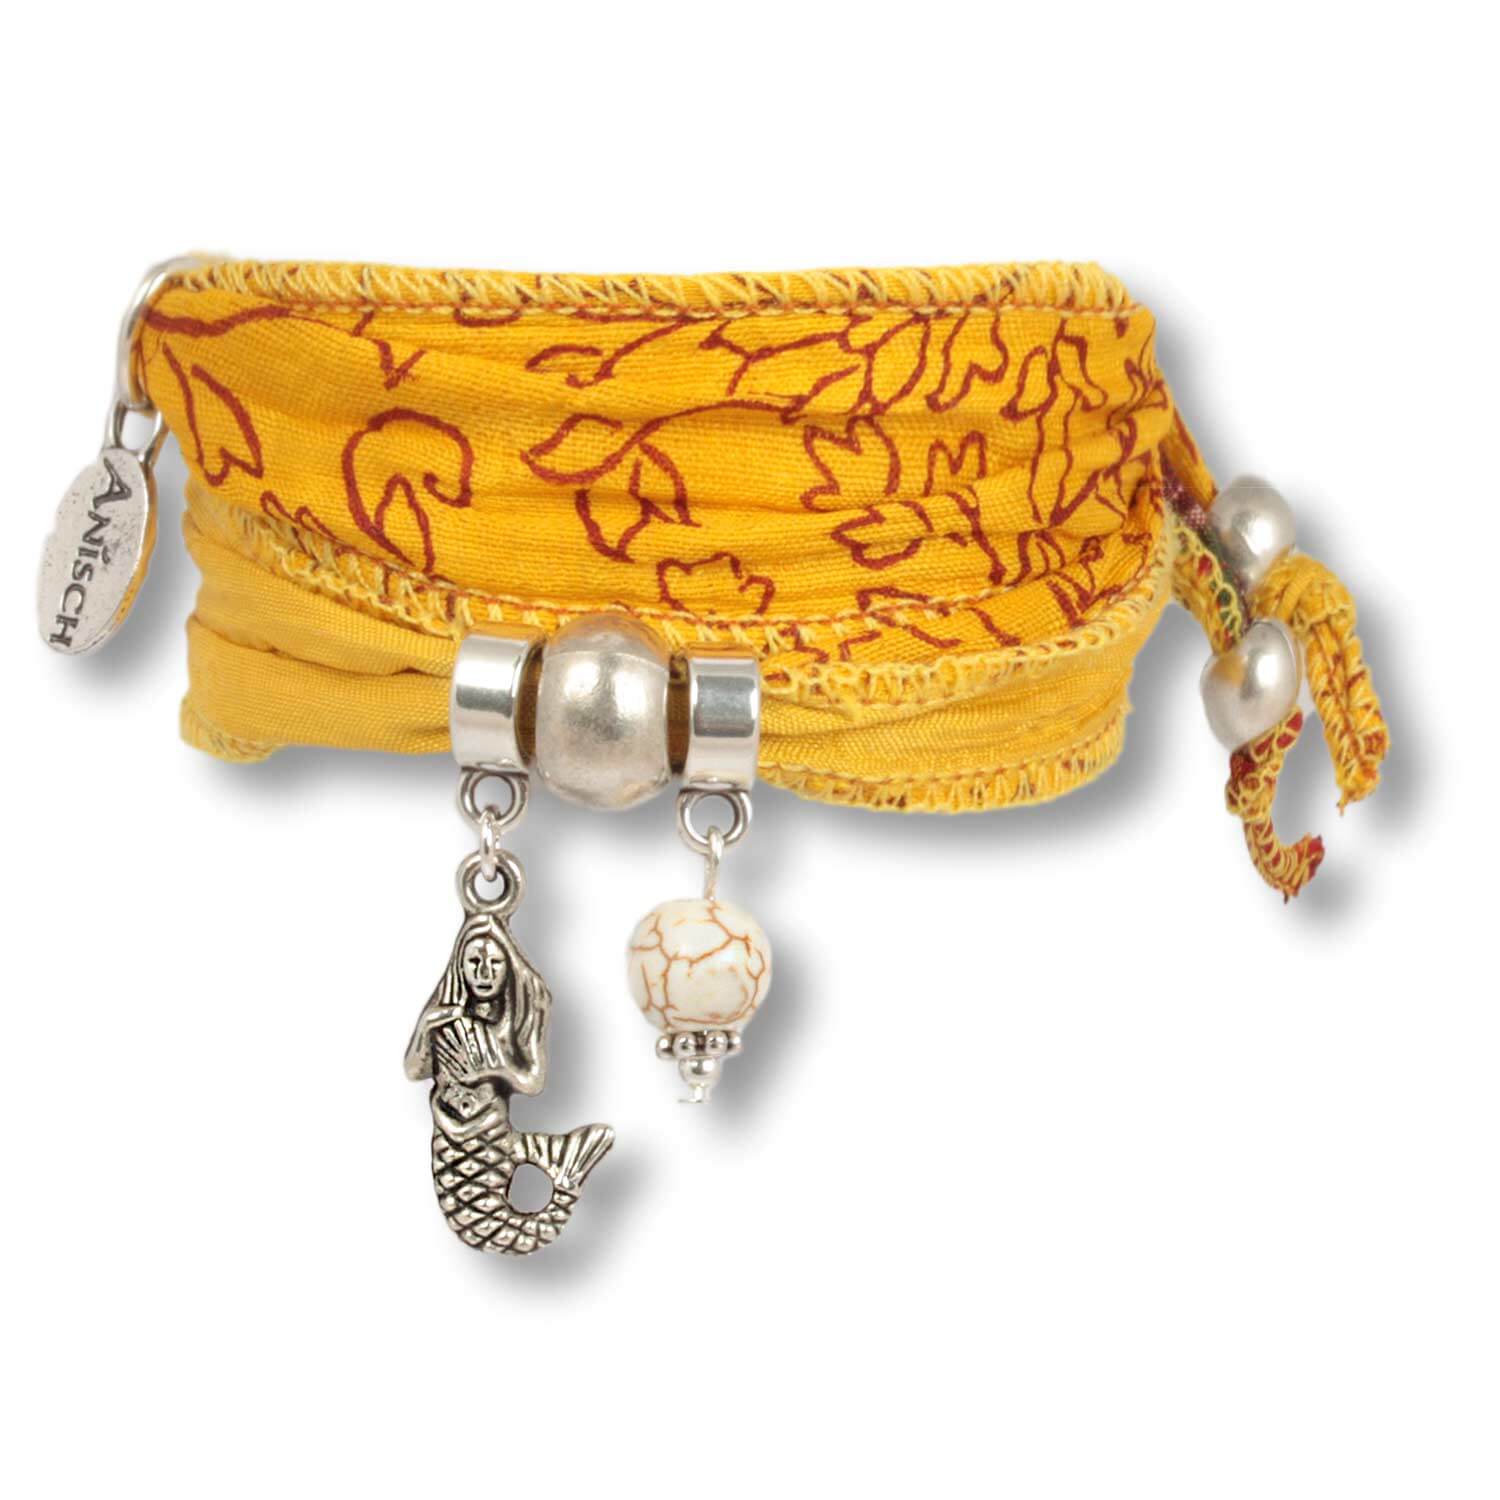 Sea Bay - Ocean Daughters lucky bracelet from indian saris with Howlith